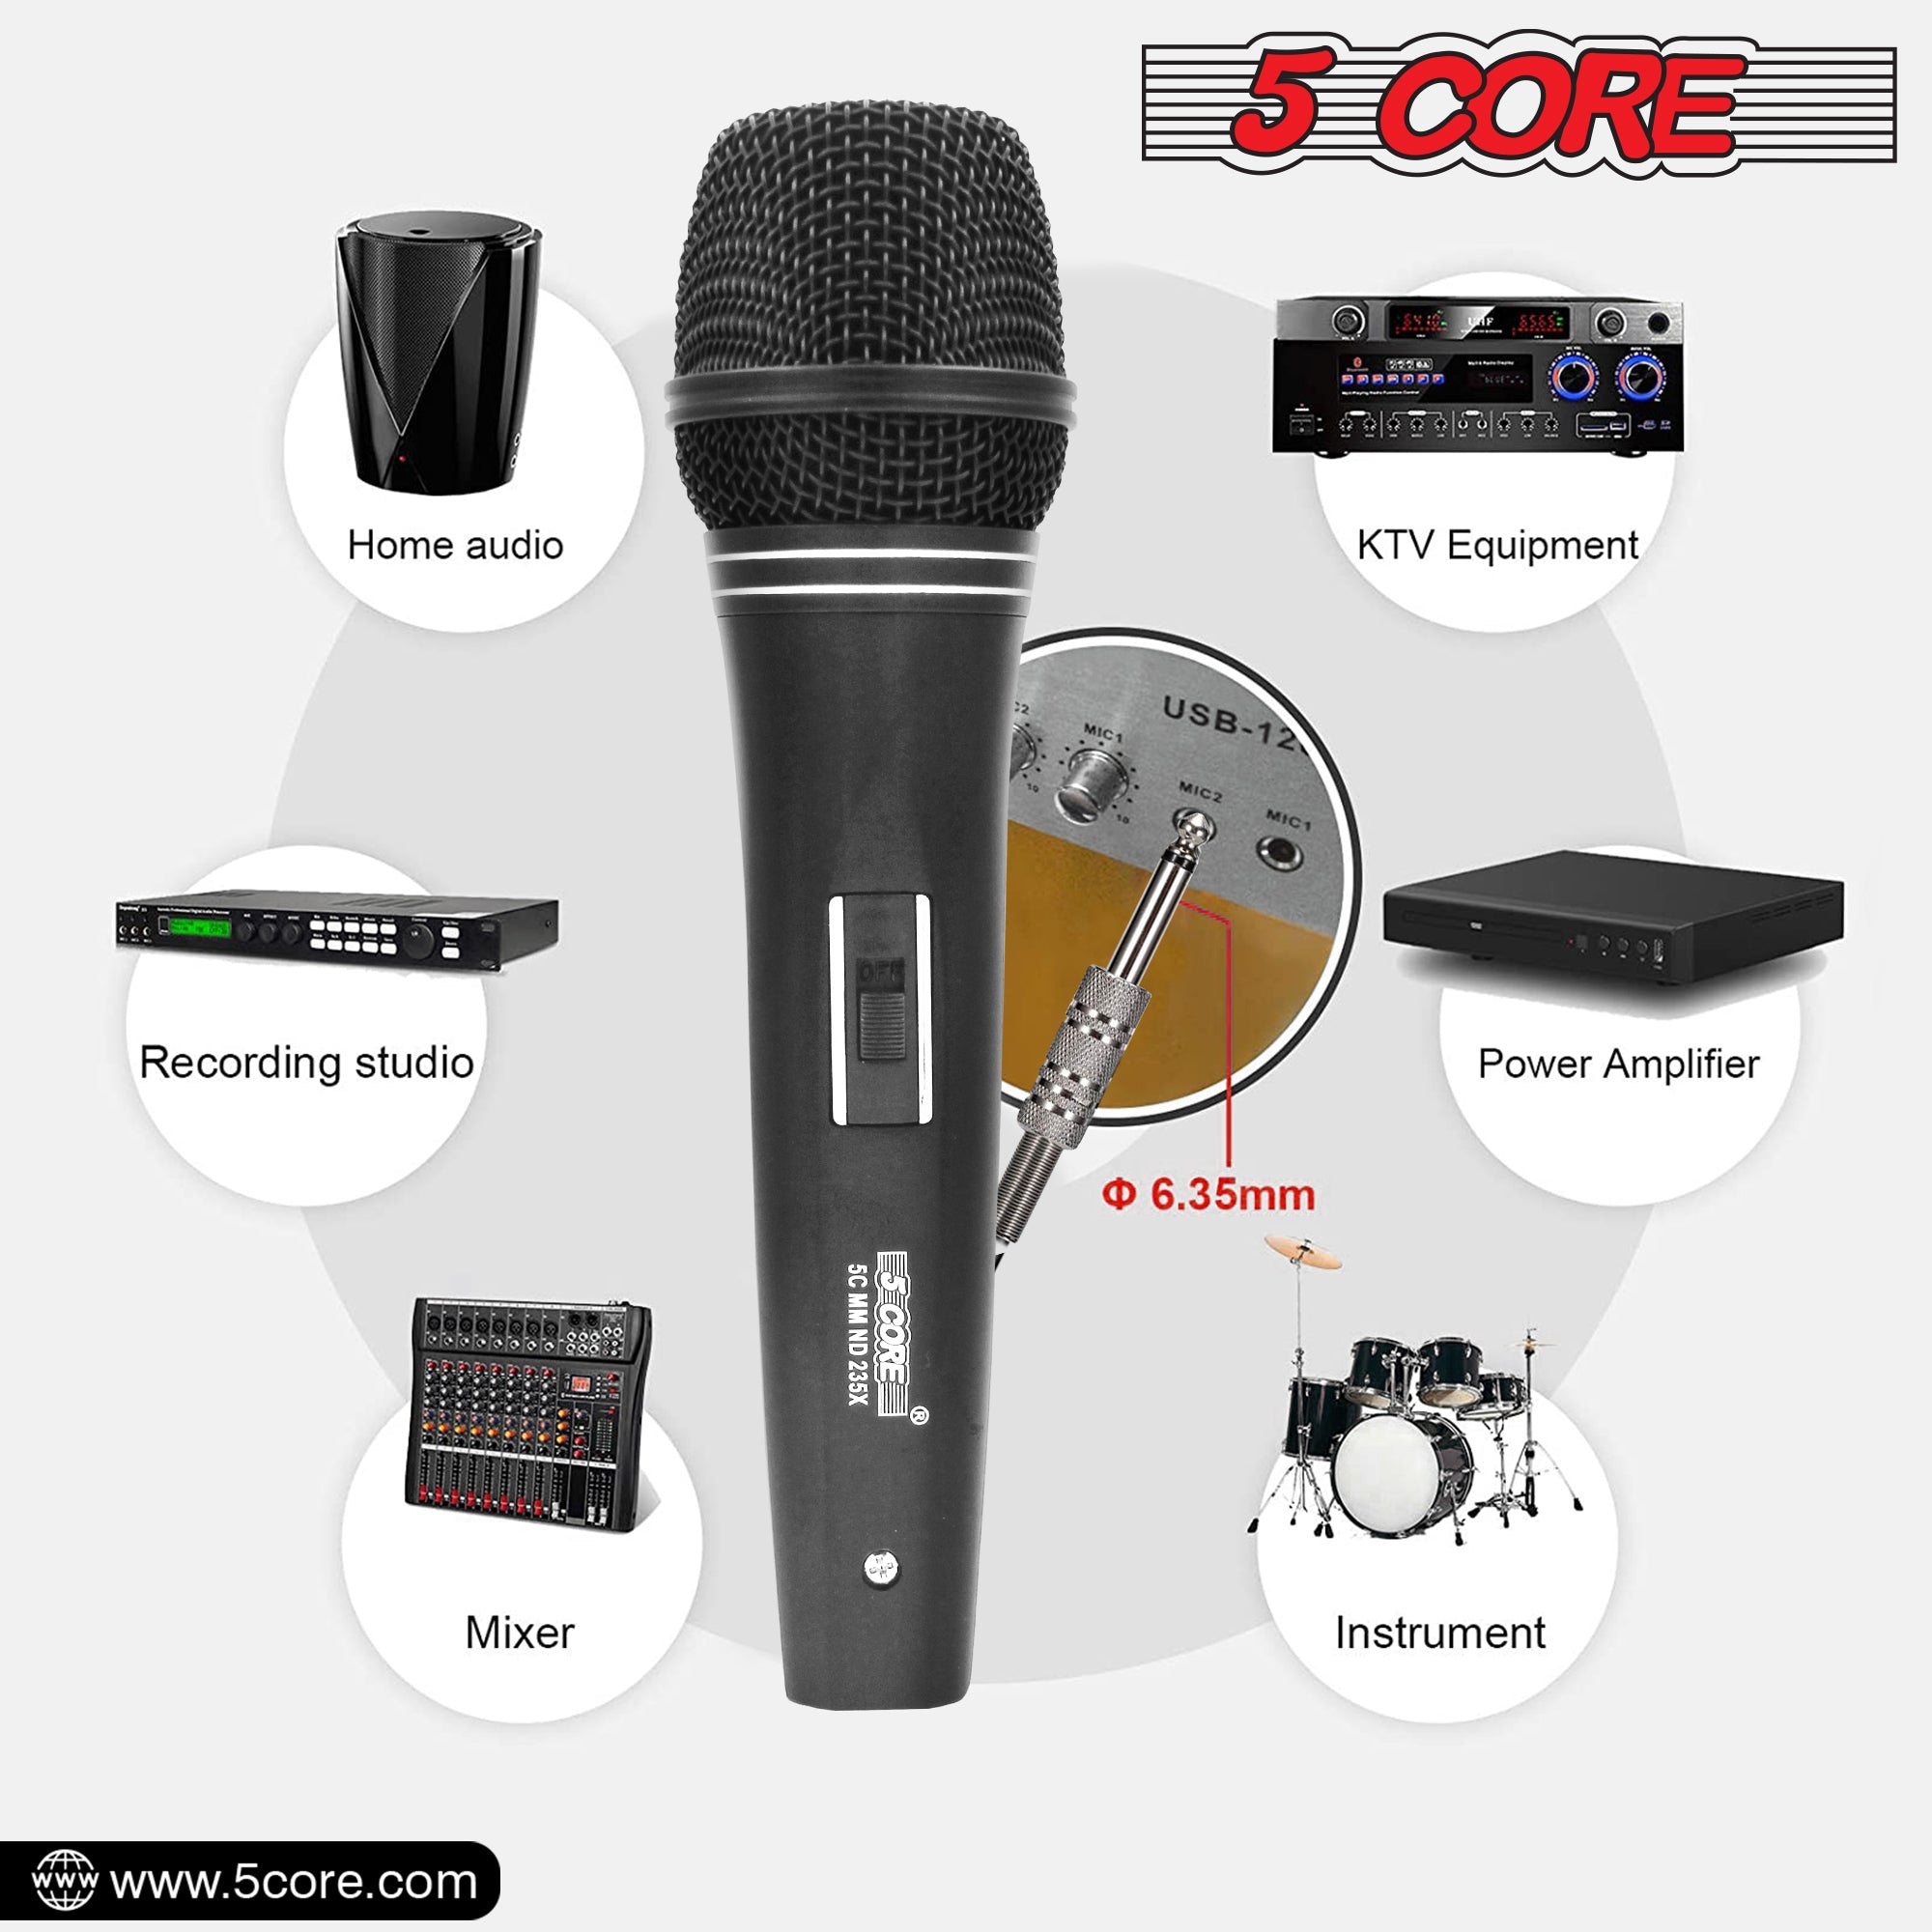 5 Core Microphone Professional Black Dynamic Karaoke XLR Wired Mic w ON/OFF Switch Pop Filter Cardioid Unidirectional Pickup -ND 235X